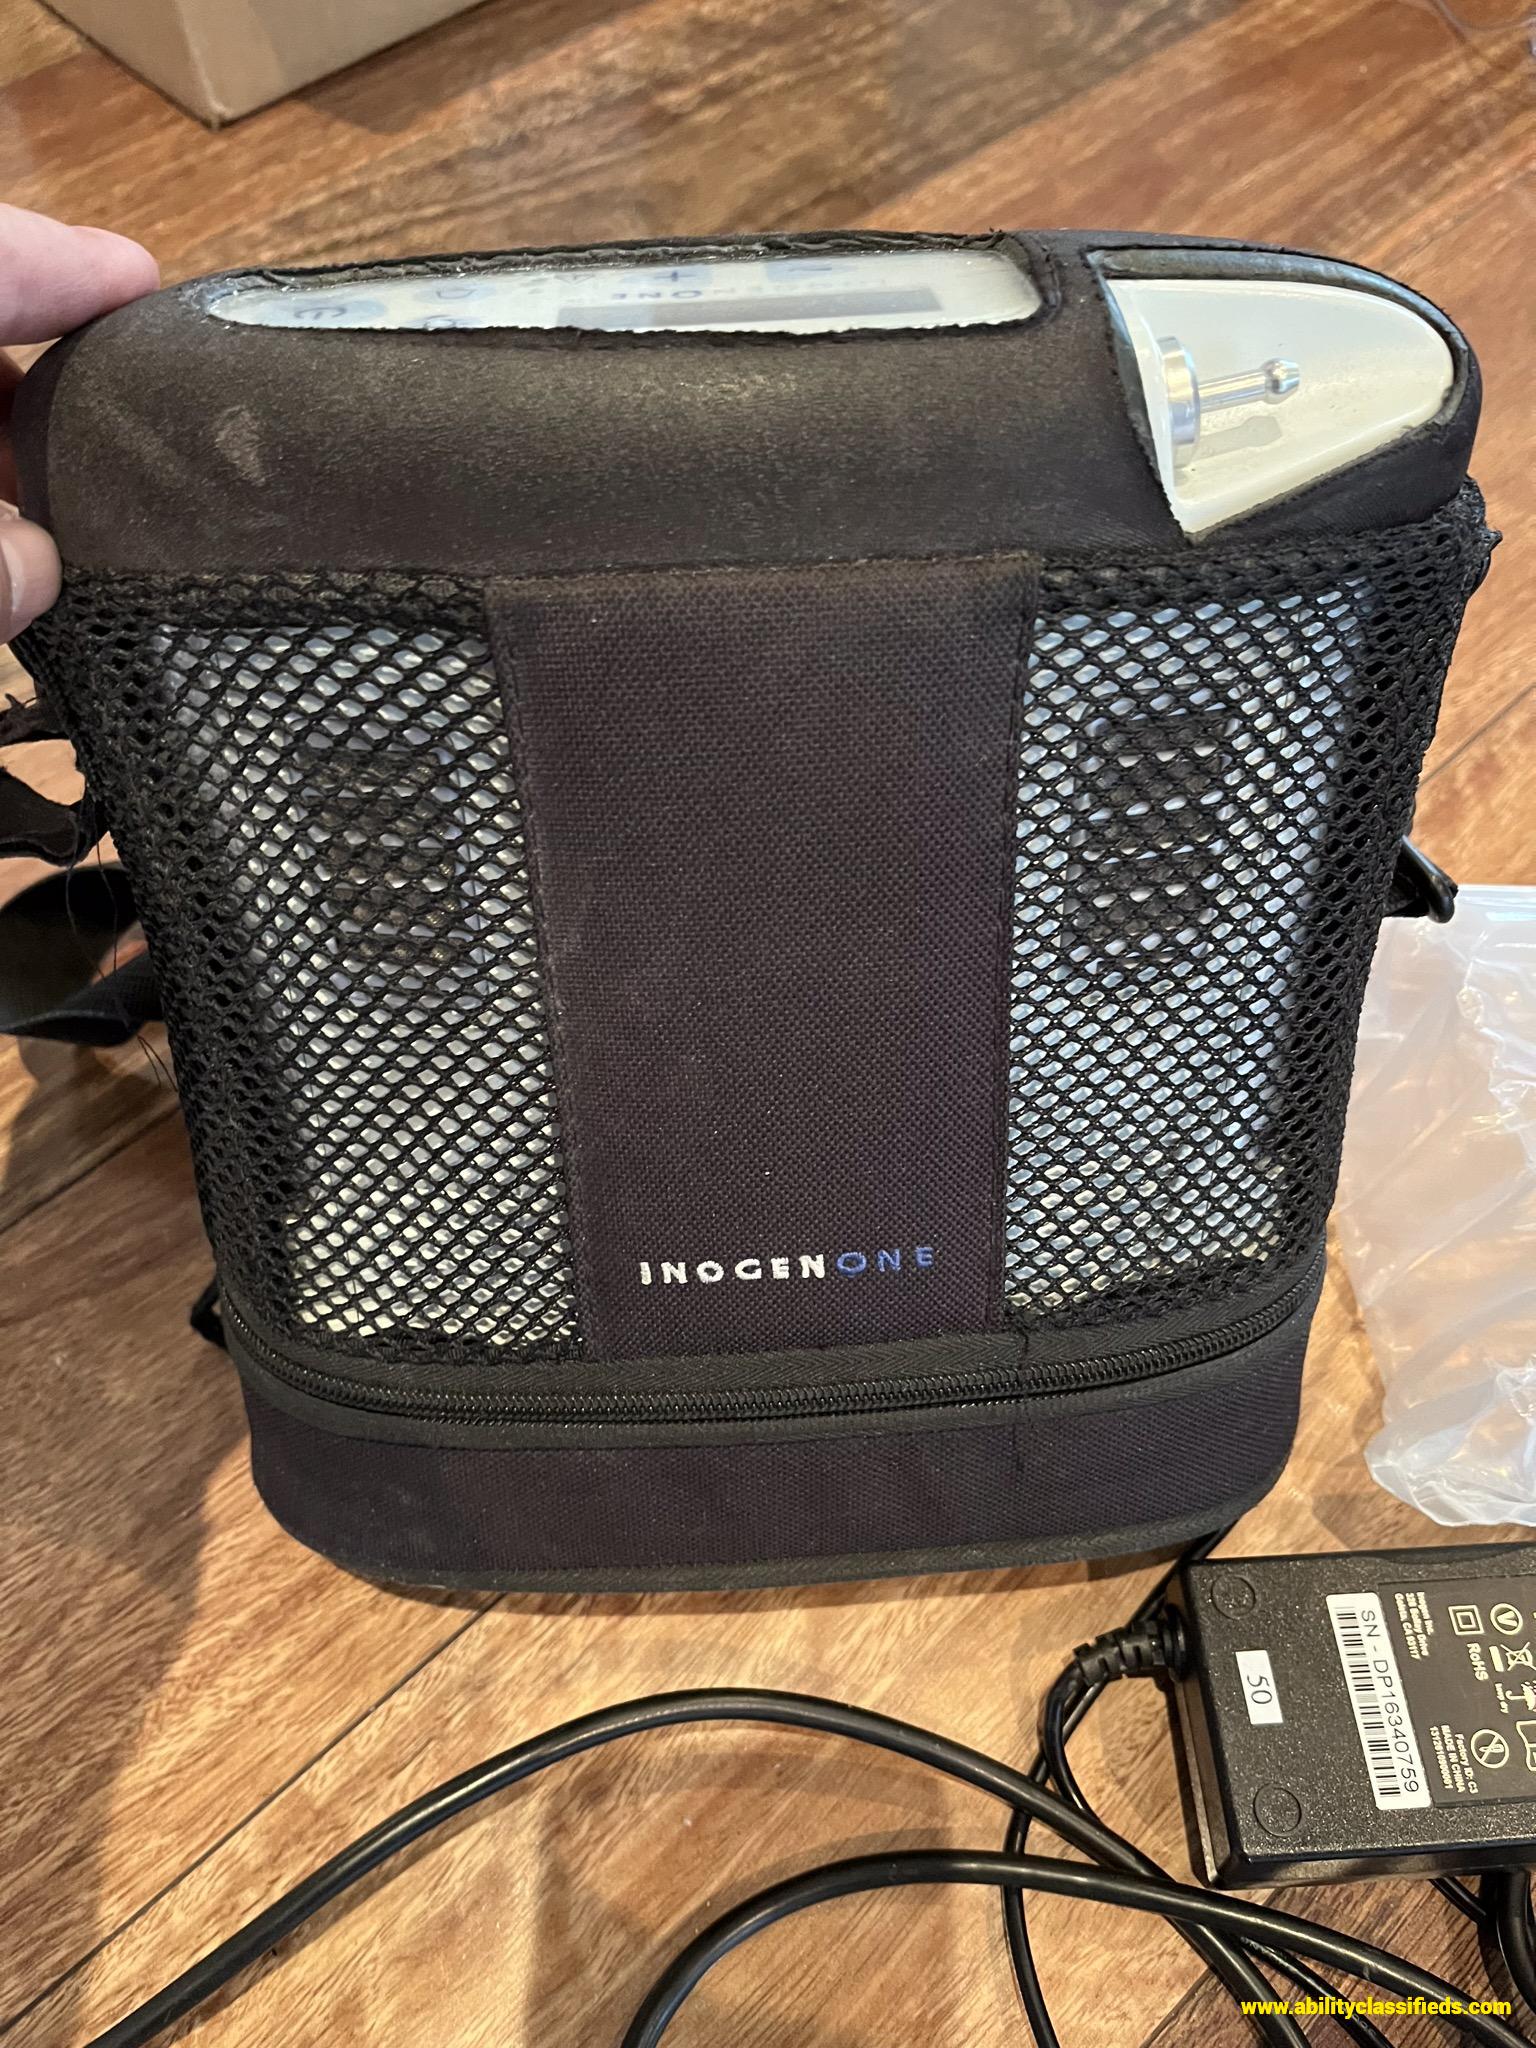 Portable Oxygen concentrator 